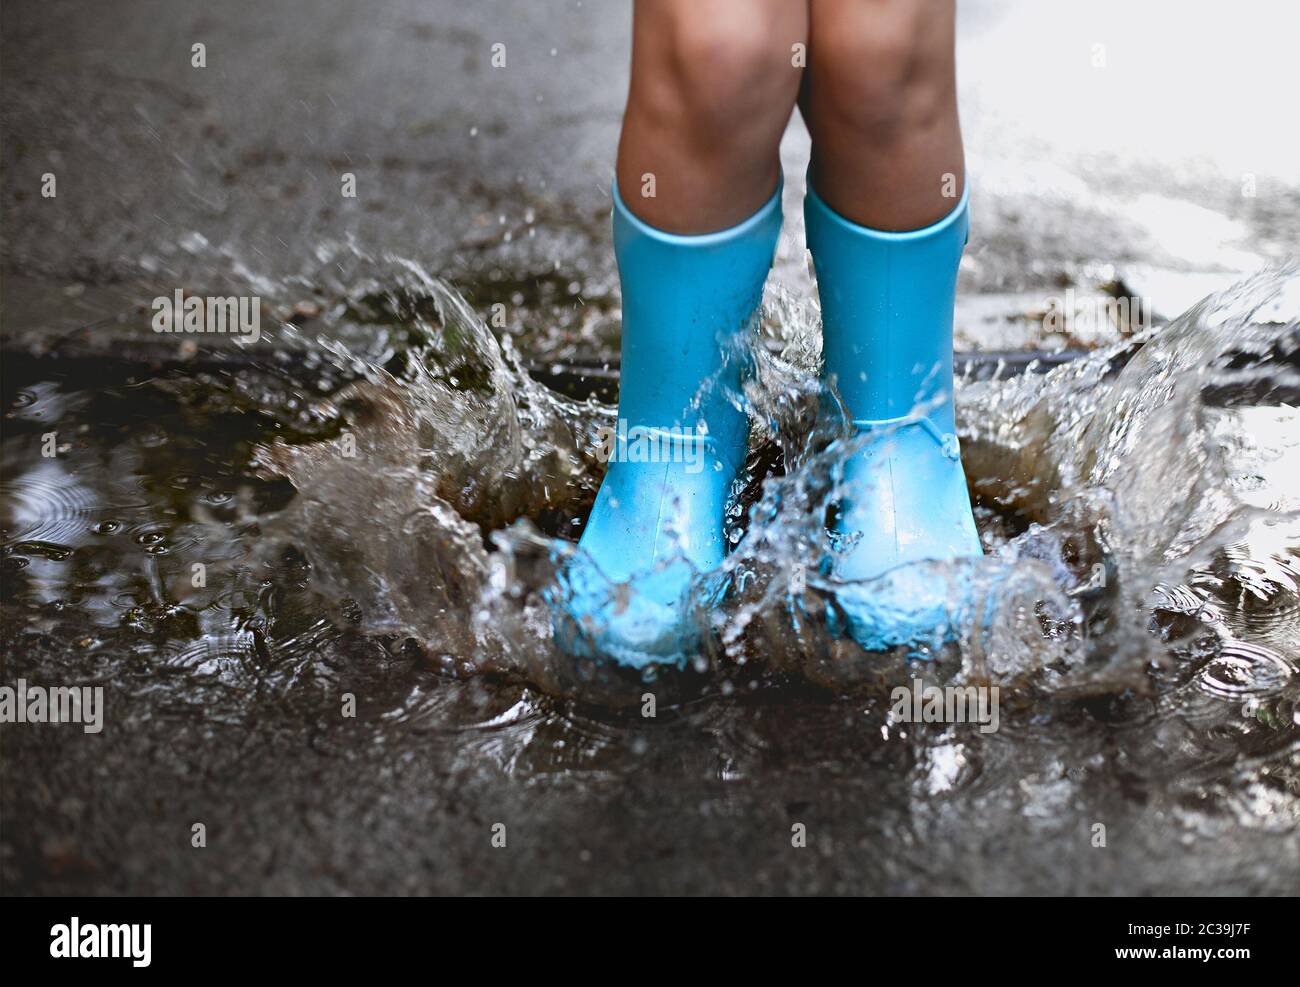 Child wearing blue rain boots jumping into a puddl Stock Photo